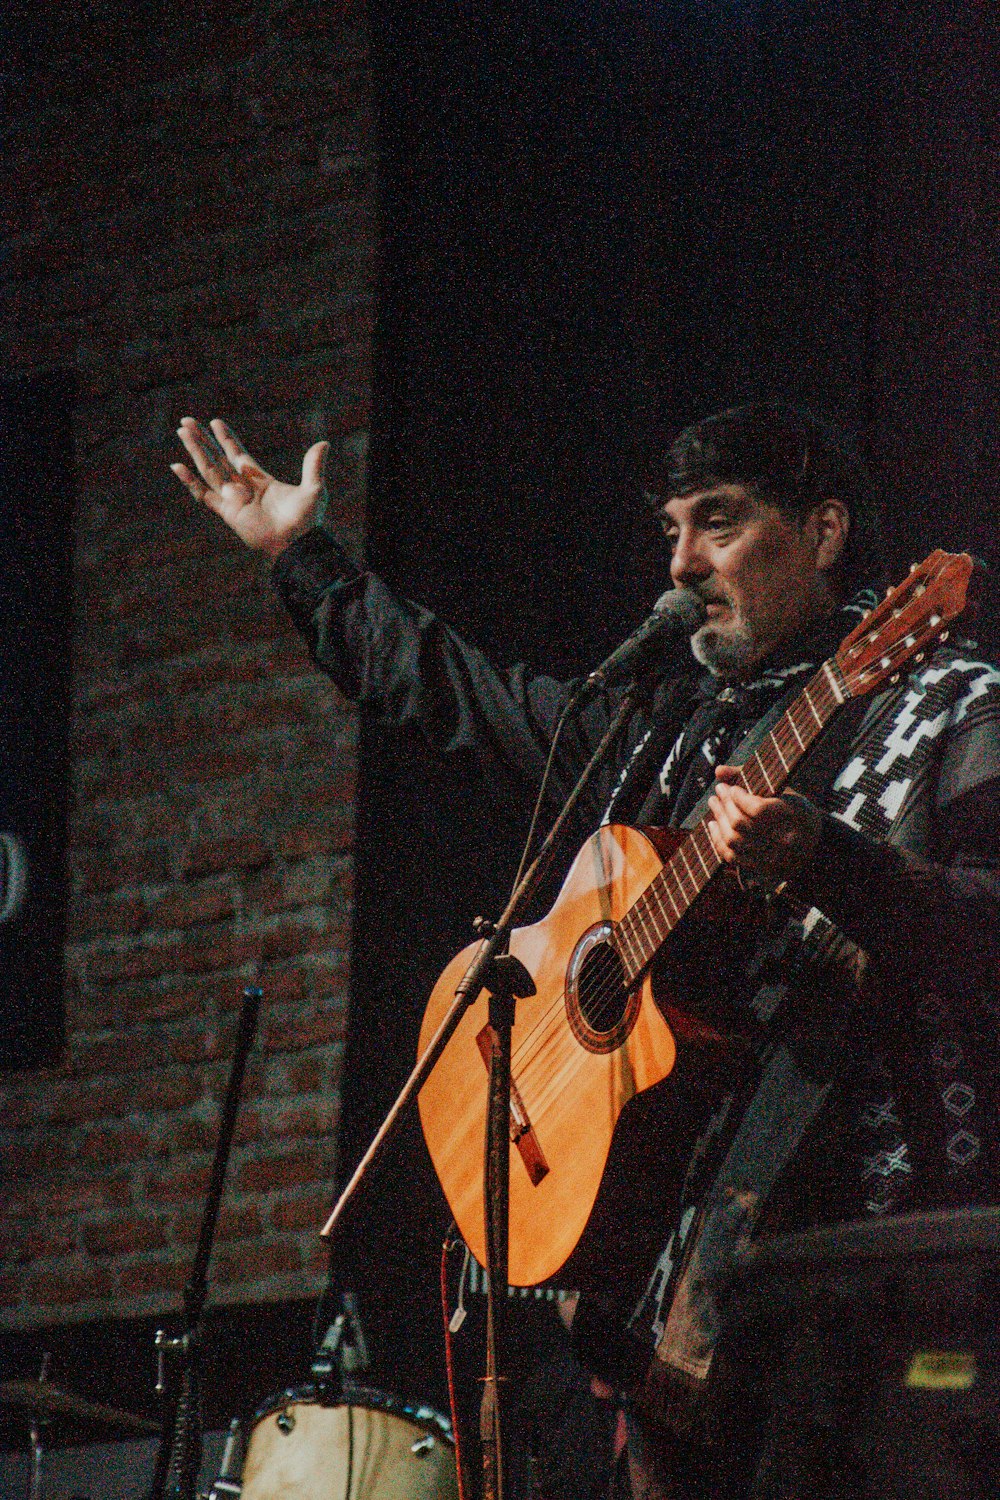 a man holding a guitar while standing next to a microphone